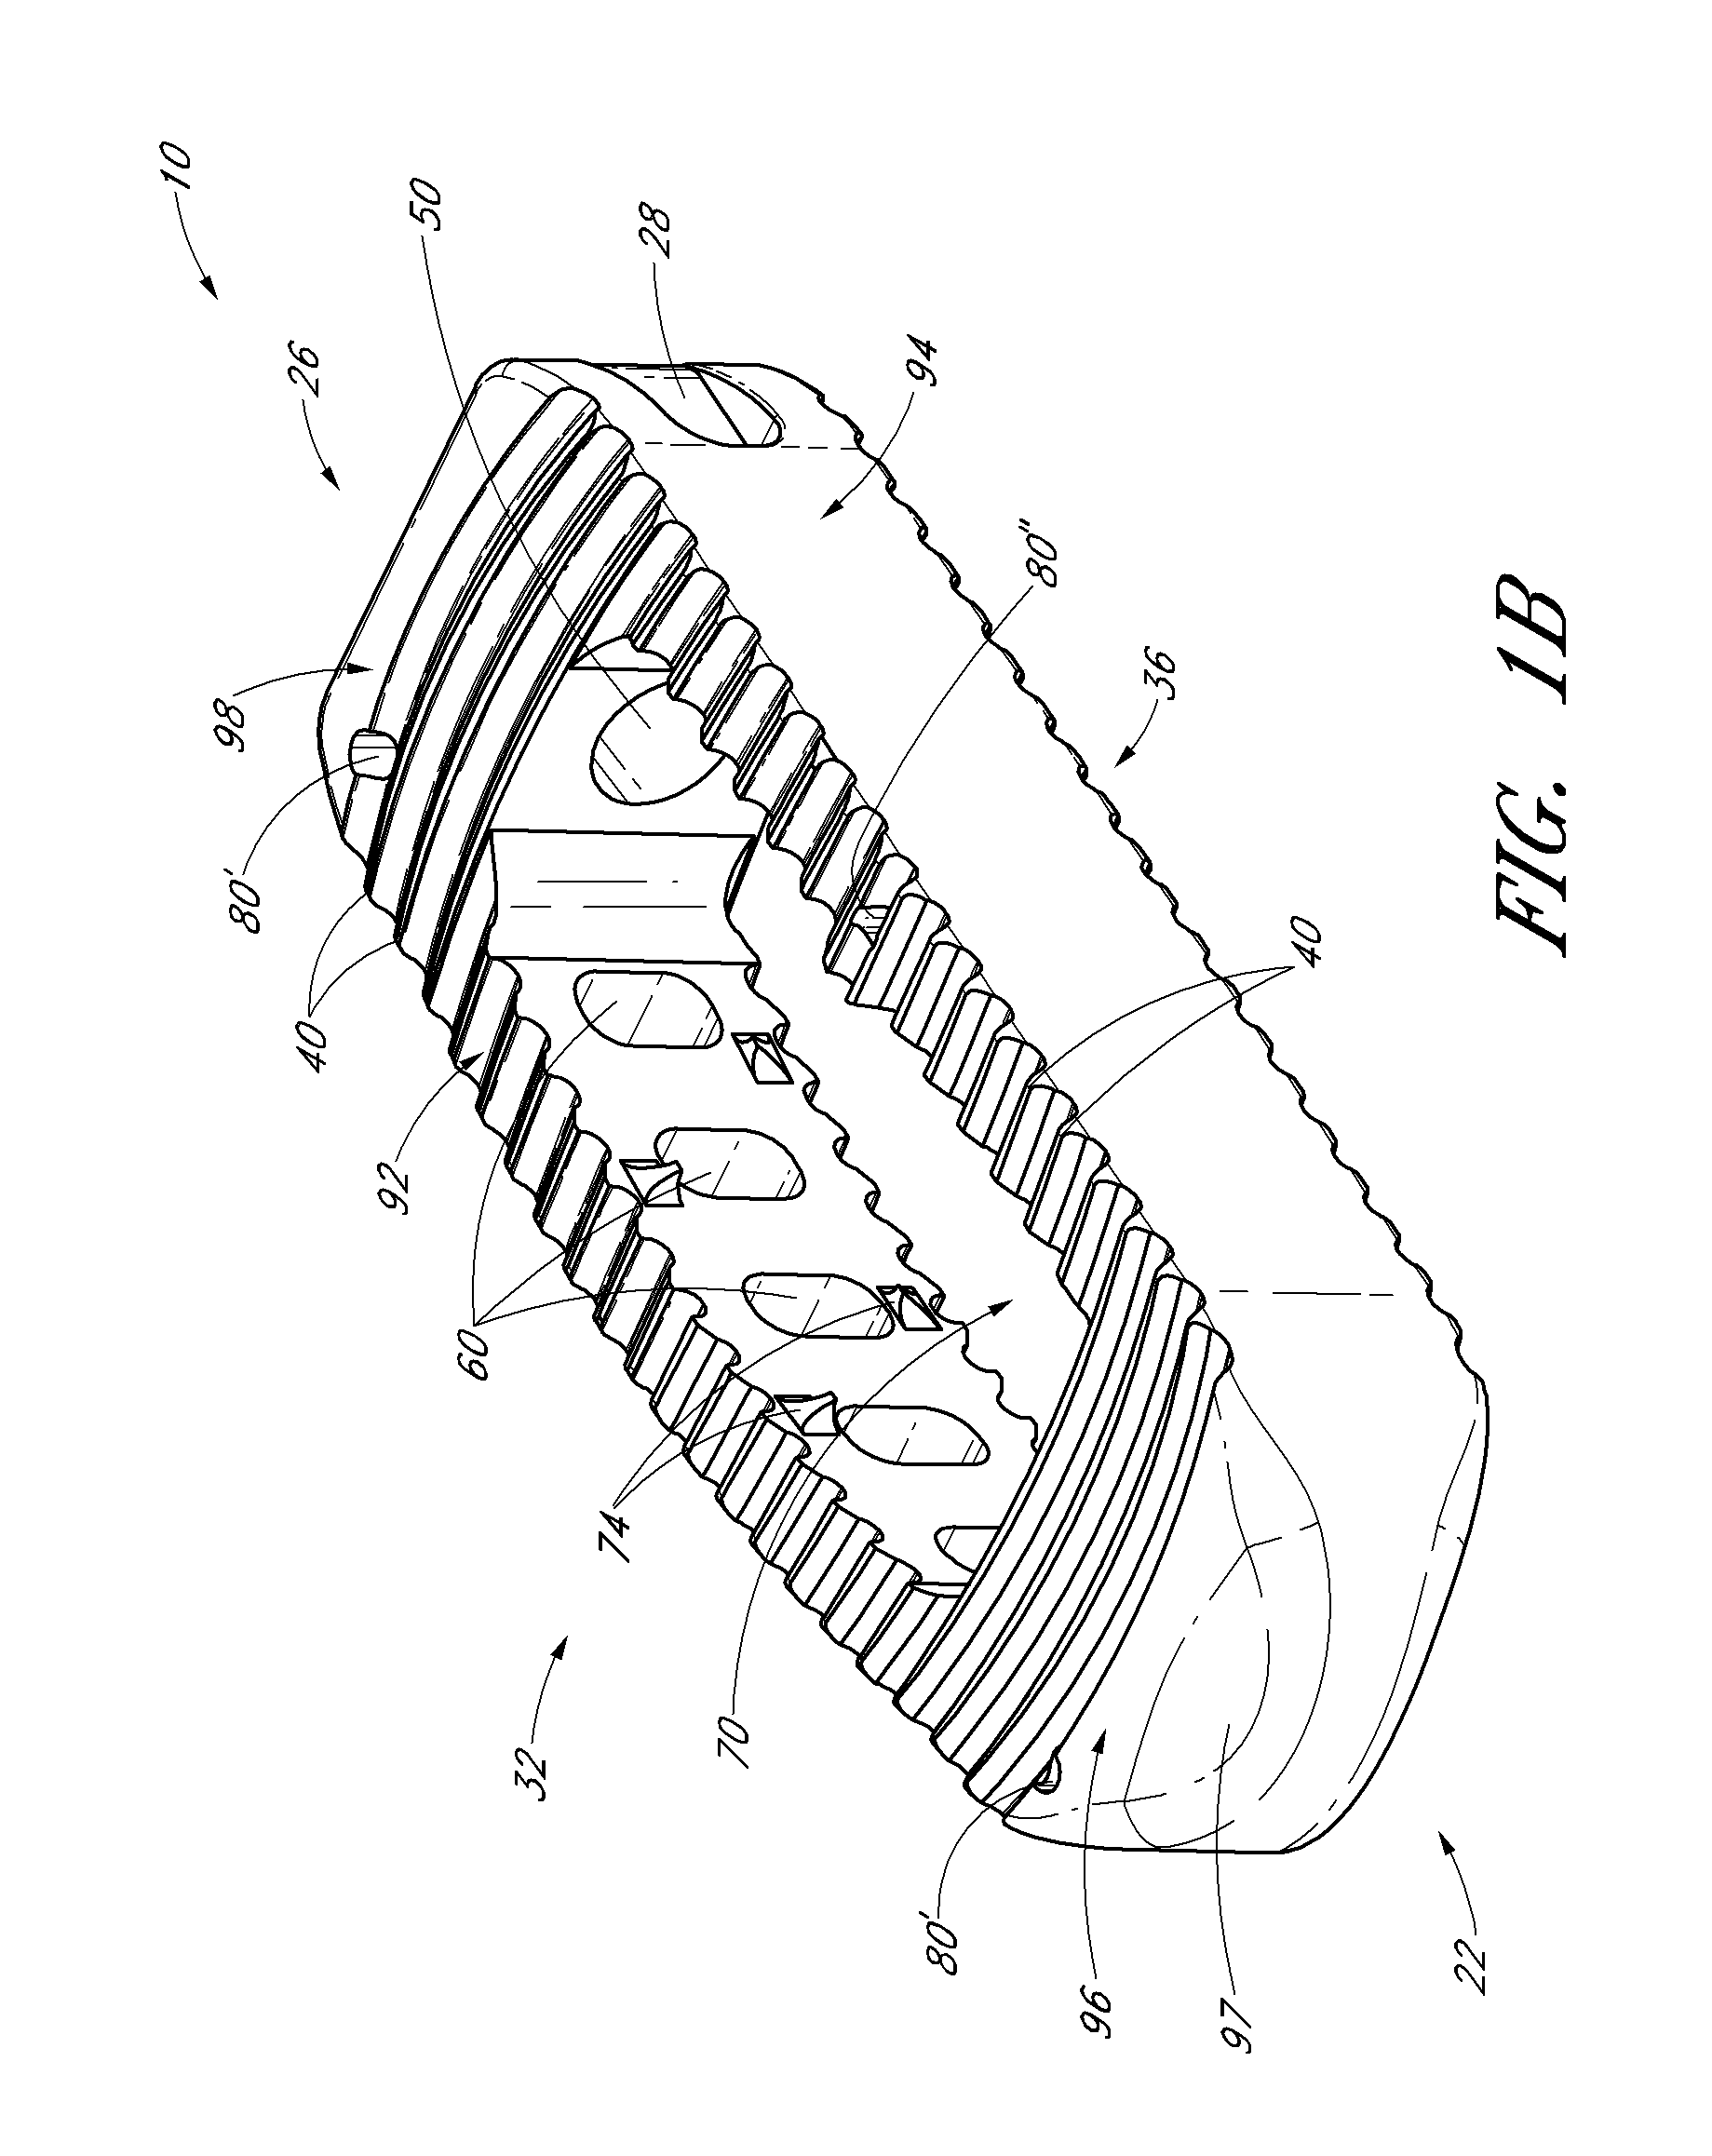 Intervertebral implants and graft delivery systems and methods